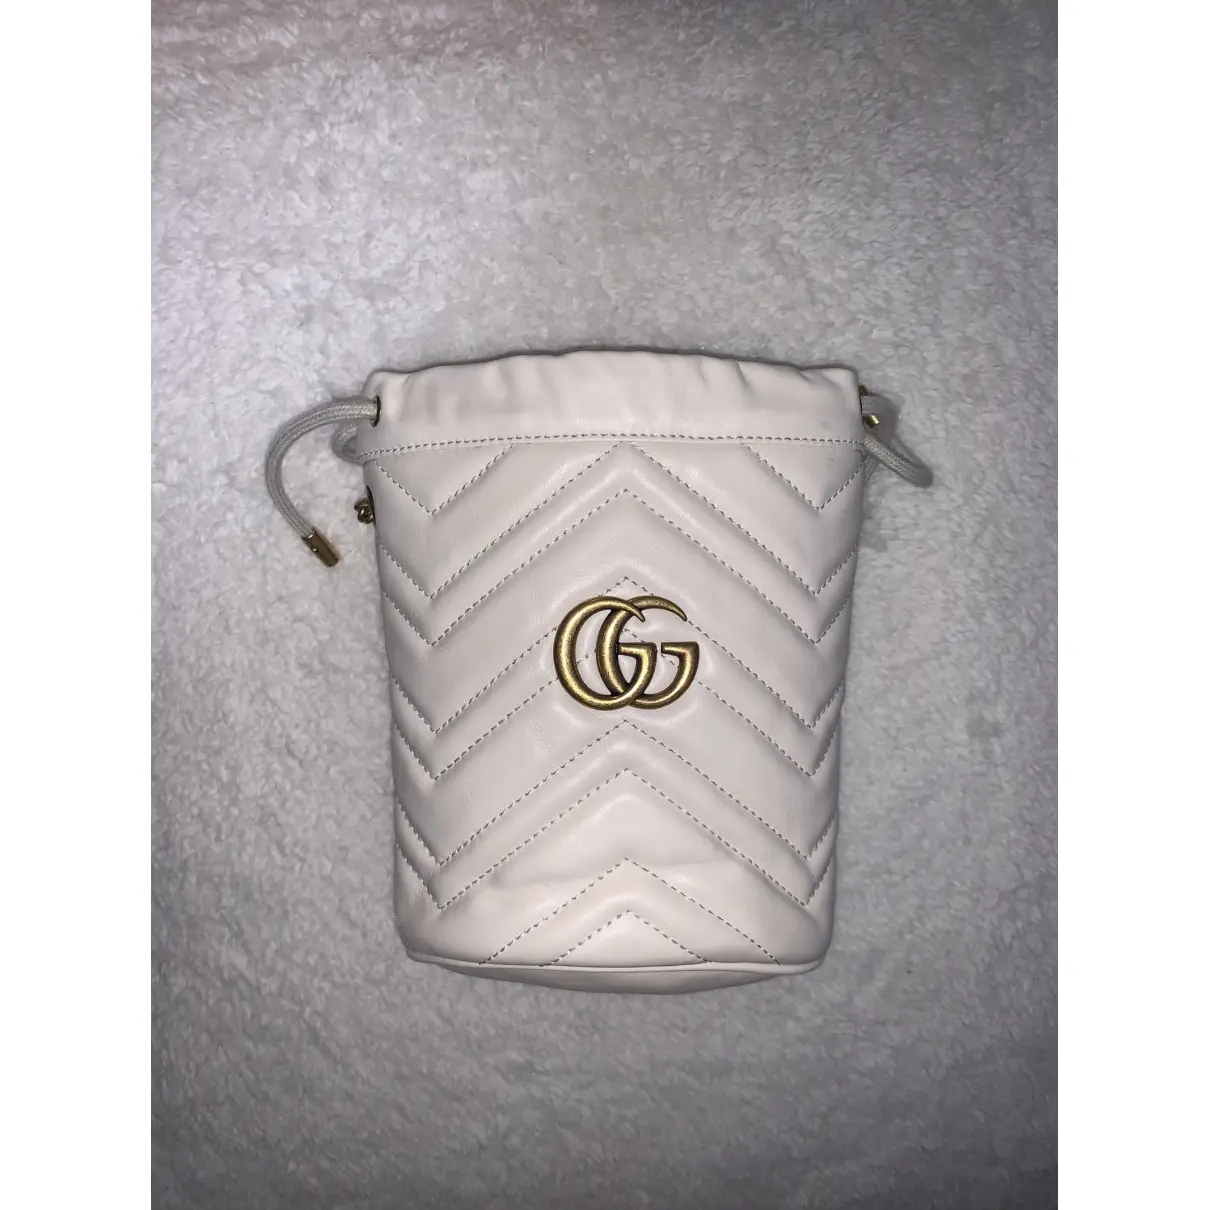 GG Marmont Chain Bucket leather crossbody bag Gucci